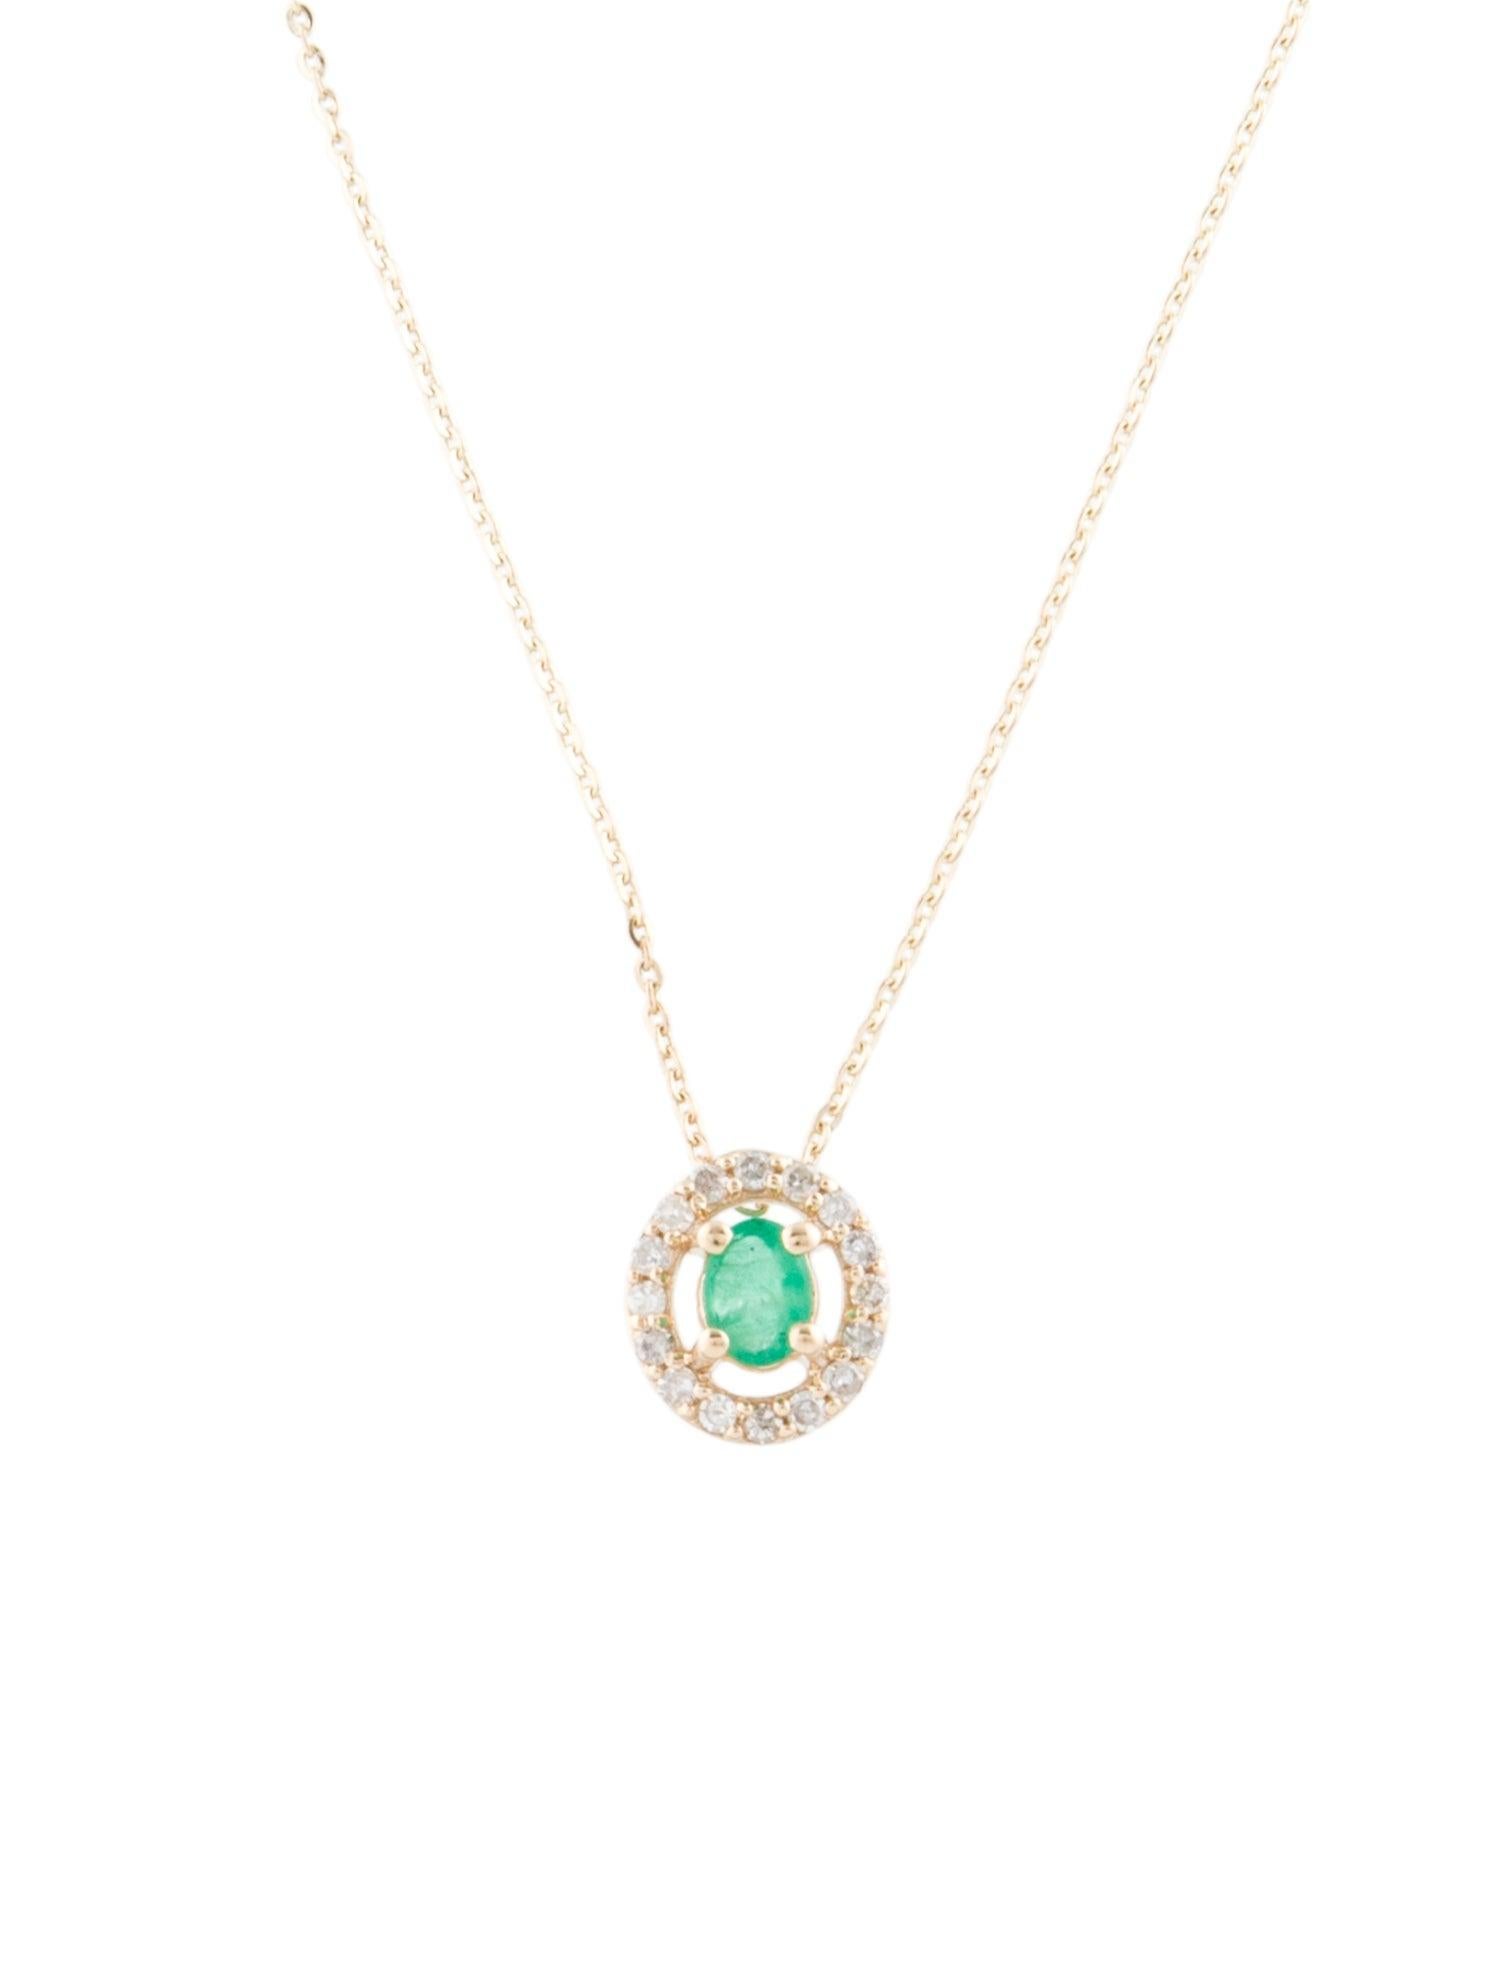 Immerse yourself in the captivating allure of our Forest Ferns collection with this exquisite Emerald and Diamond Pendant from Jeweltique. This pendant is more than just jewelry; it's a sublime connection to the verdant wonders of the natural